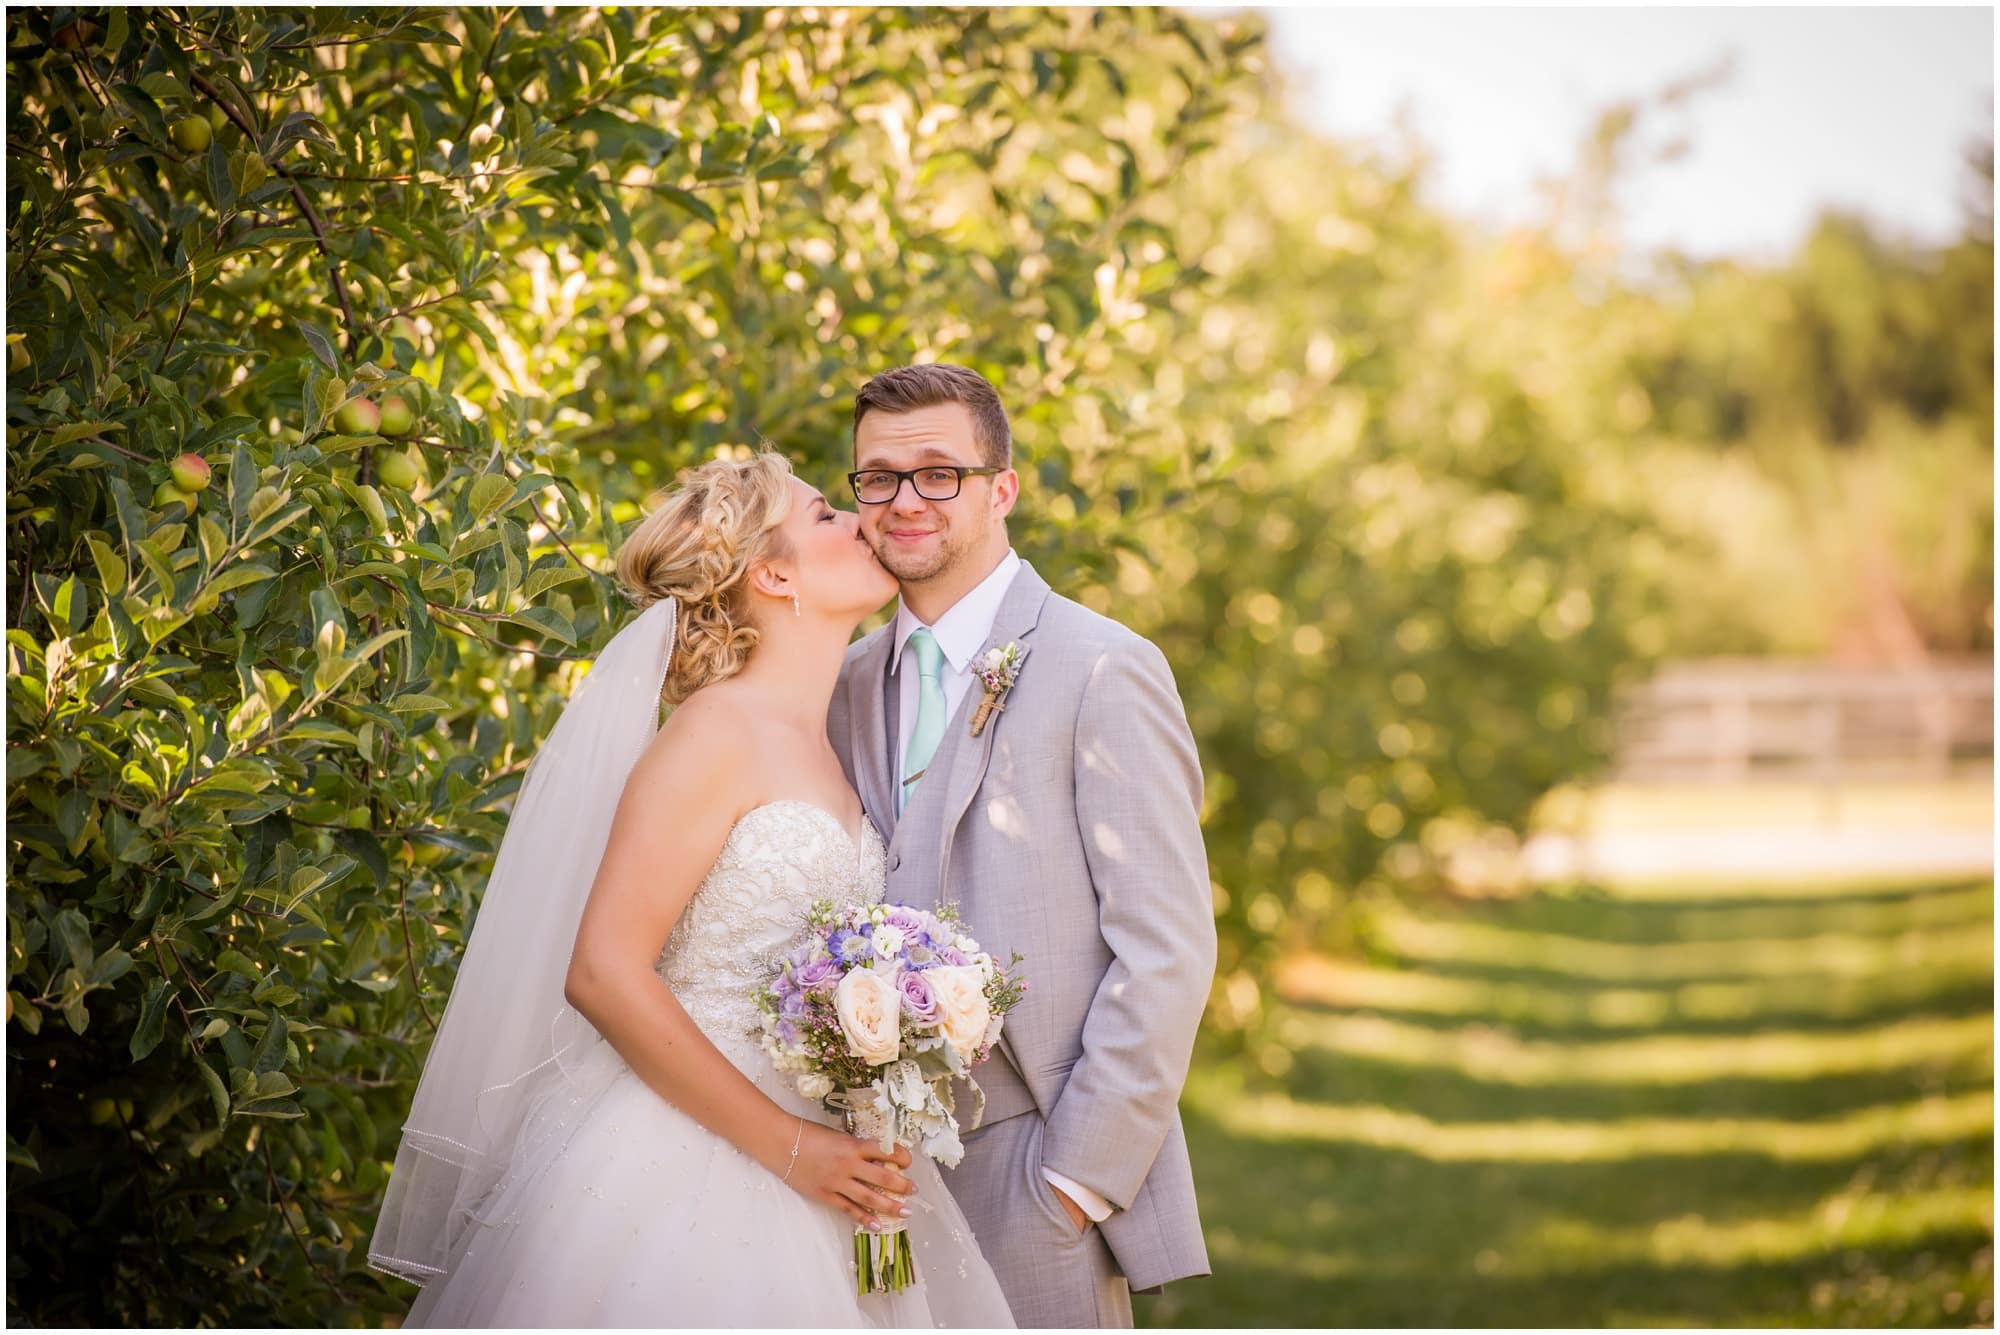 County Line Orchard Wedding Photographer bride kissing groom on cheek in orchard 